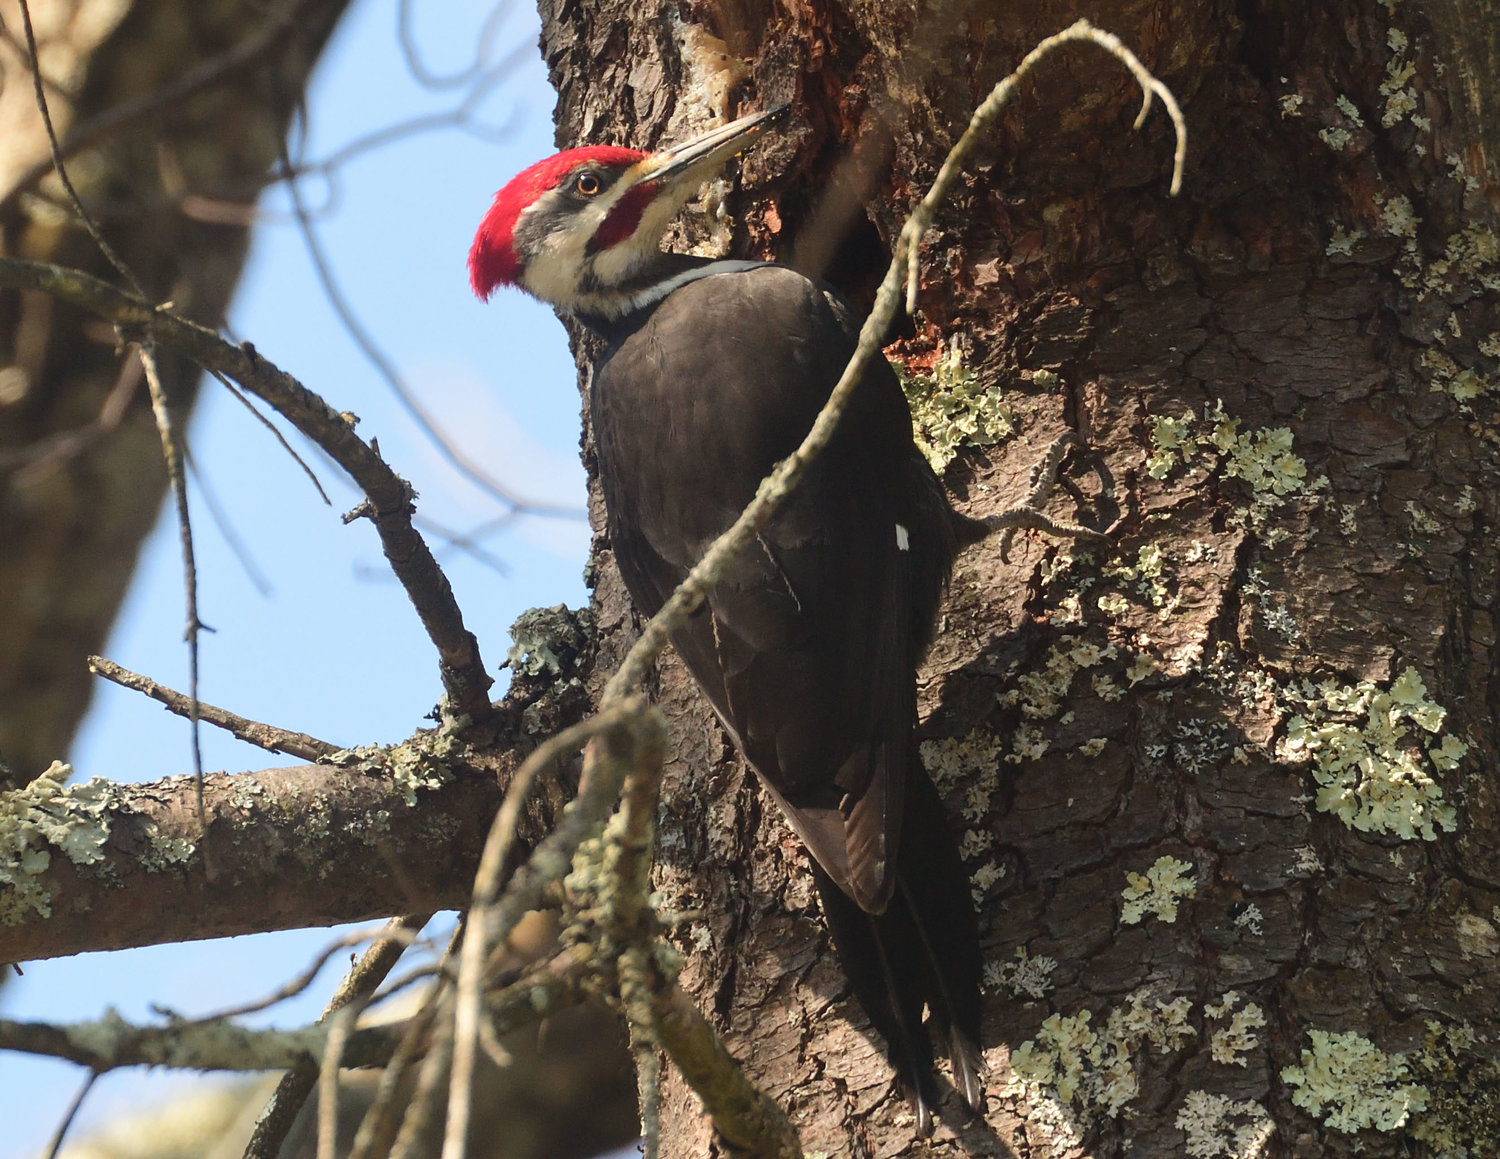 The pileated woodpecker is the largest woodpecker in the region. Like other woodpeckers, the male has more red than the female (the male has red cheek stripes—the female has black stripes). In flight, they display white underwing sections. Their call is loud and described as whinnying. The drum is a gradually fading roll that lasts about three seconds, gradually diminishing in volume through the drum.